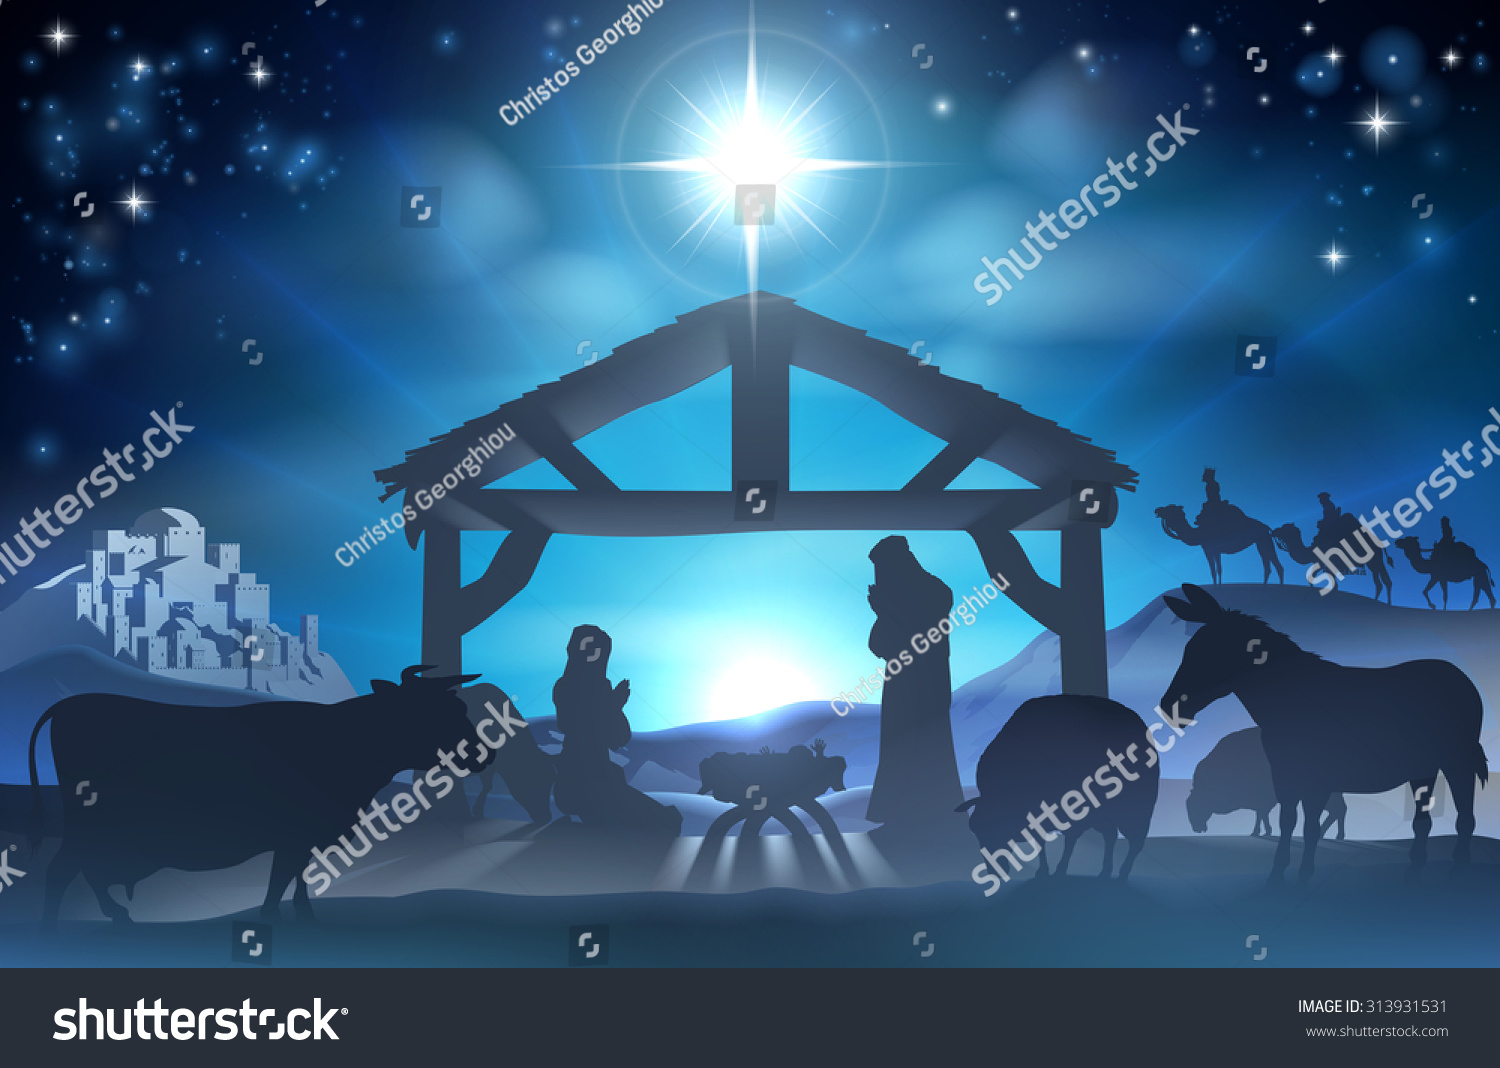 13,726 Christmas Manger Religious Images, Stock Photos & Vectors ...